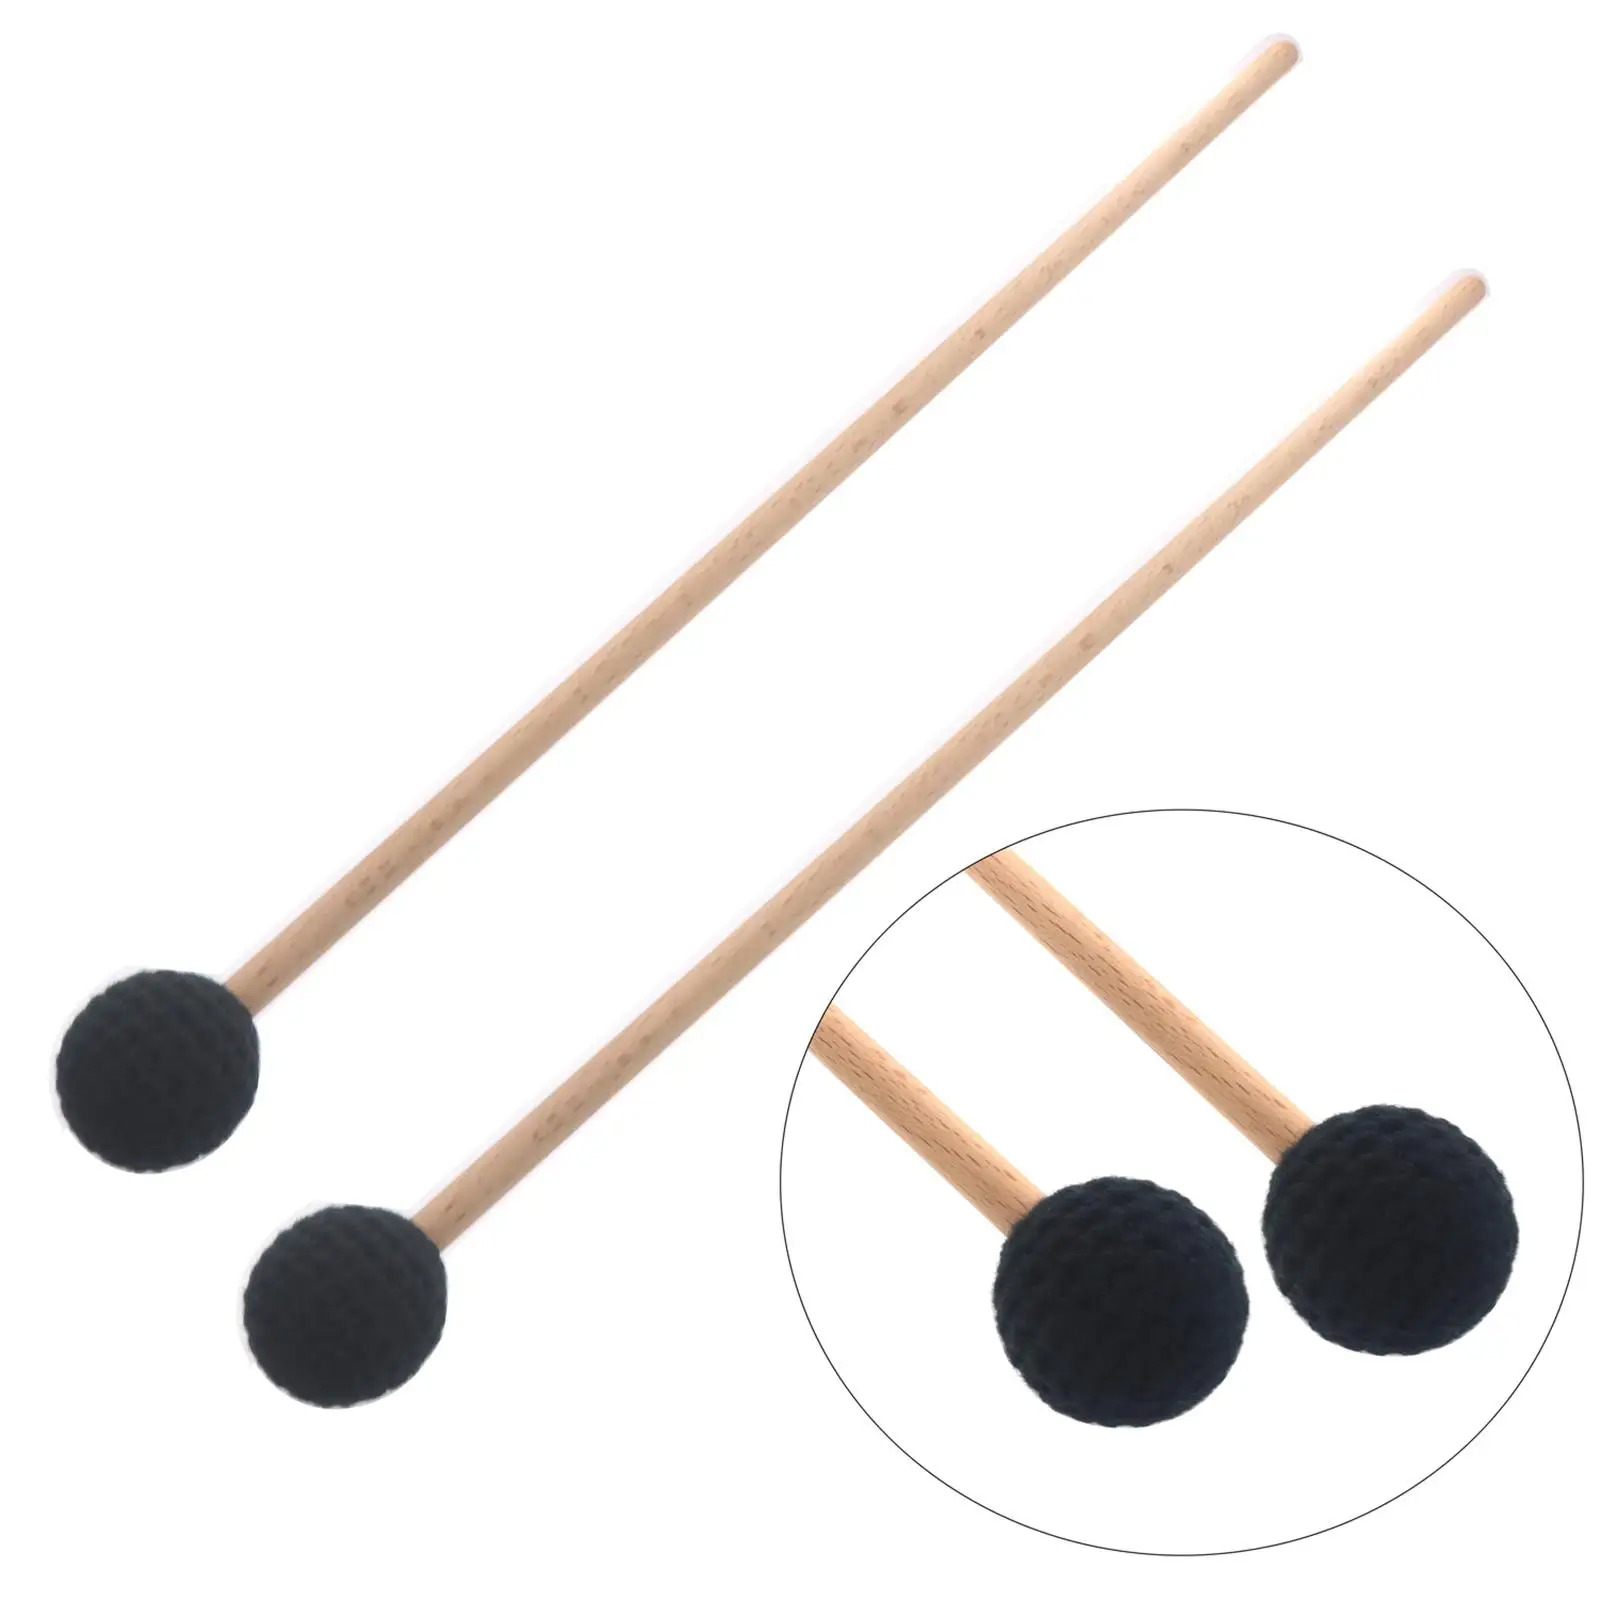 2x Percussion Mallets Sticks with Wooden Handle 17 inch Long Glockenspiel Sticks for Drummers Practitioners Xylophone